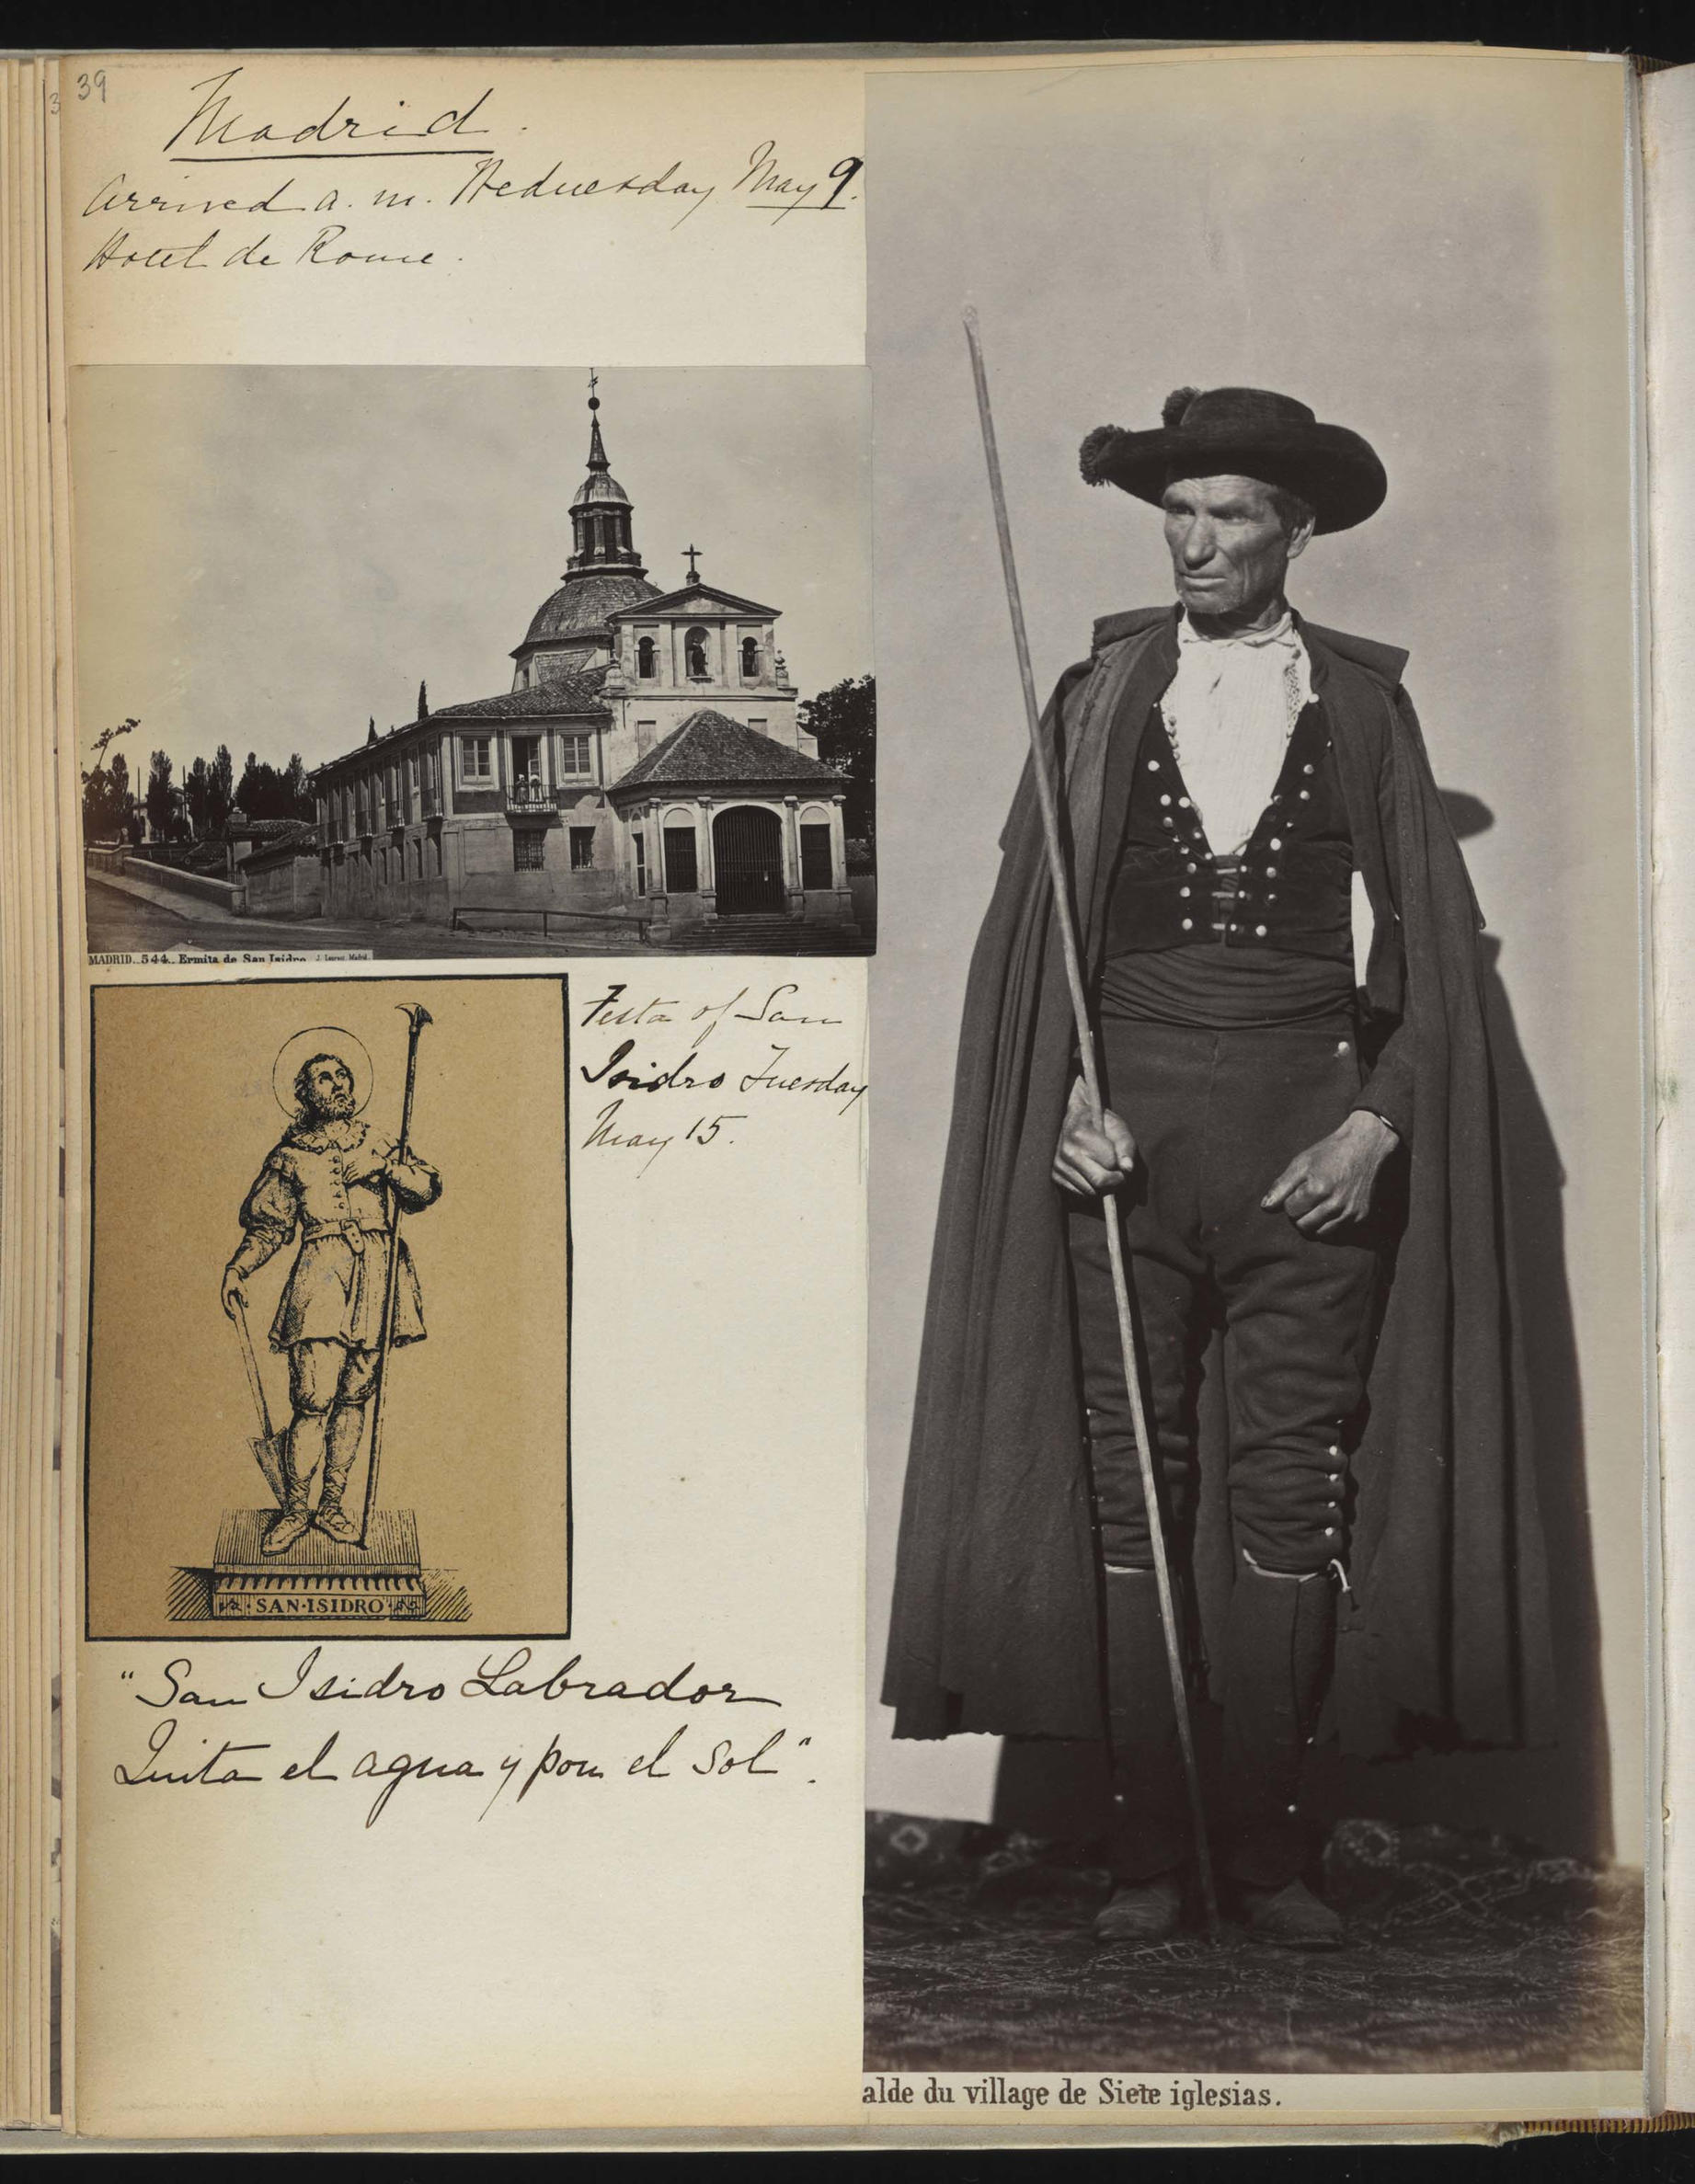 Photo of a church in Madrid, a picture of Isidore the Laborer, and a Spanish Man from the San Isidro neighborhood of Madrid